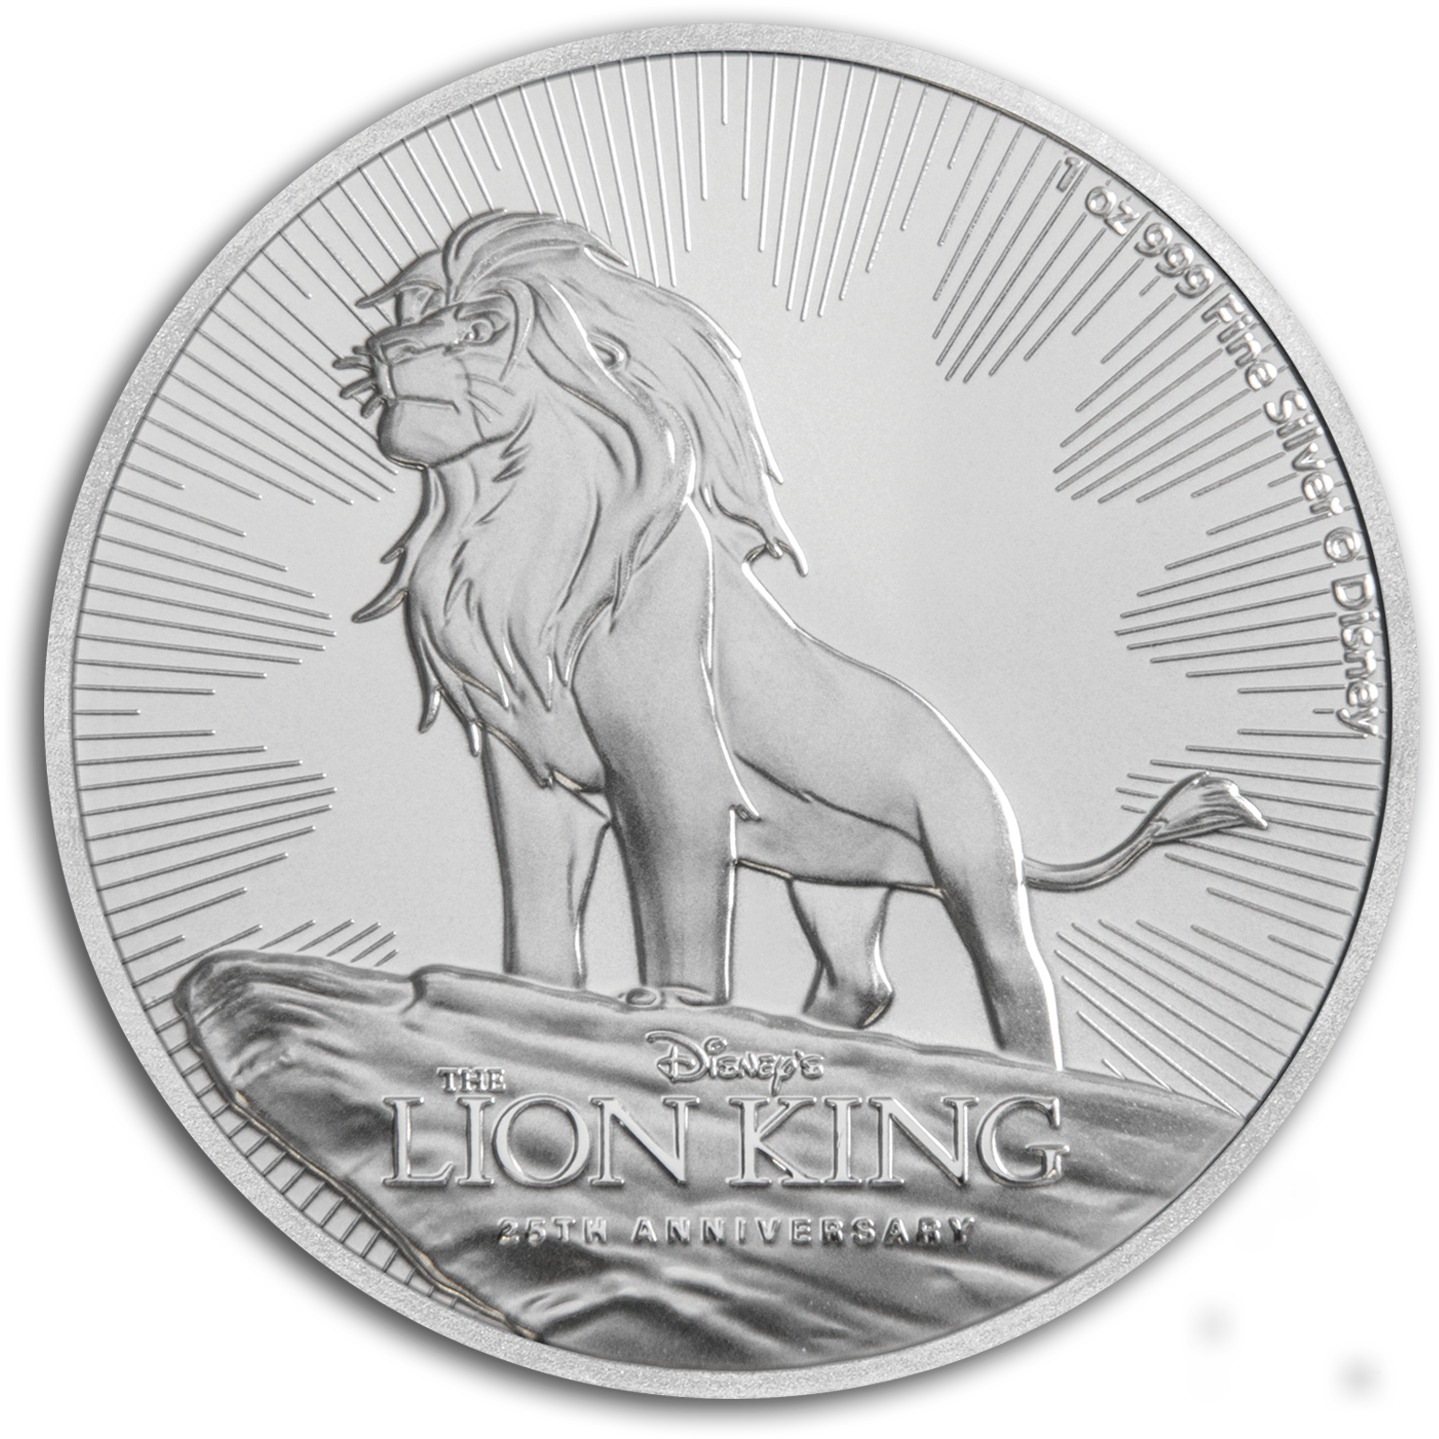 Lion King25th Anniversary Coin PNG image